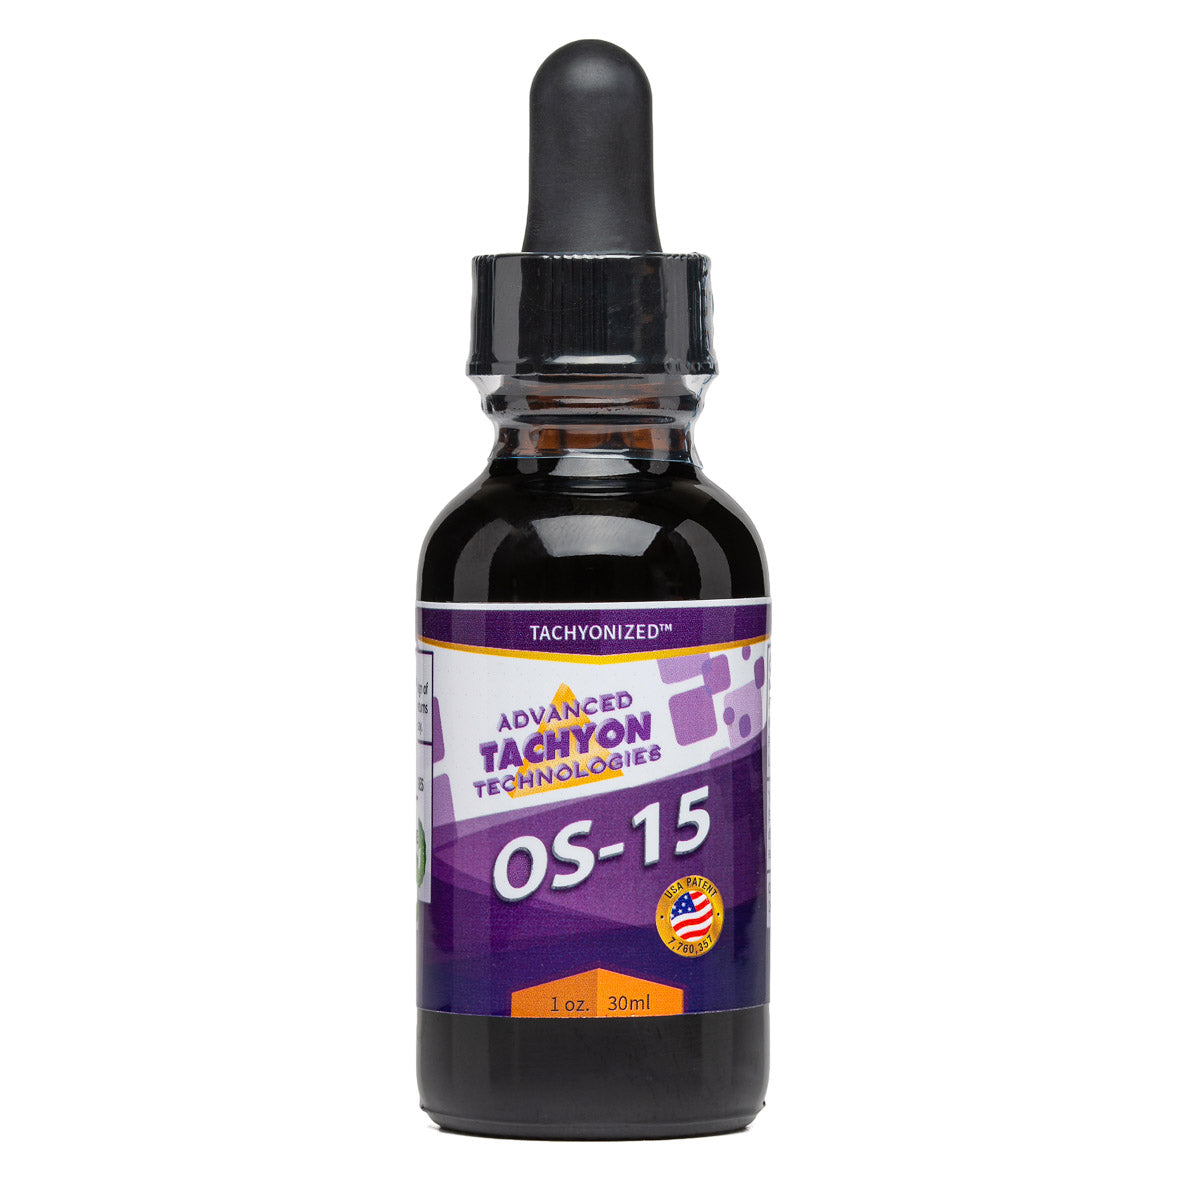 OS-15 | Feverfew &amp; Meadowsweet | ATT Tachyon | Raw Living UK | Supplements | Tincture | Pain Relief | Advanced Tachyon Technologies Tachyonized Feverfew and Meadowsweet. Used regularly, these herbs have been proven to be effective in treating migraine headaches